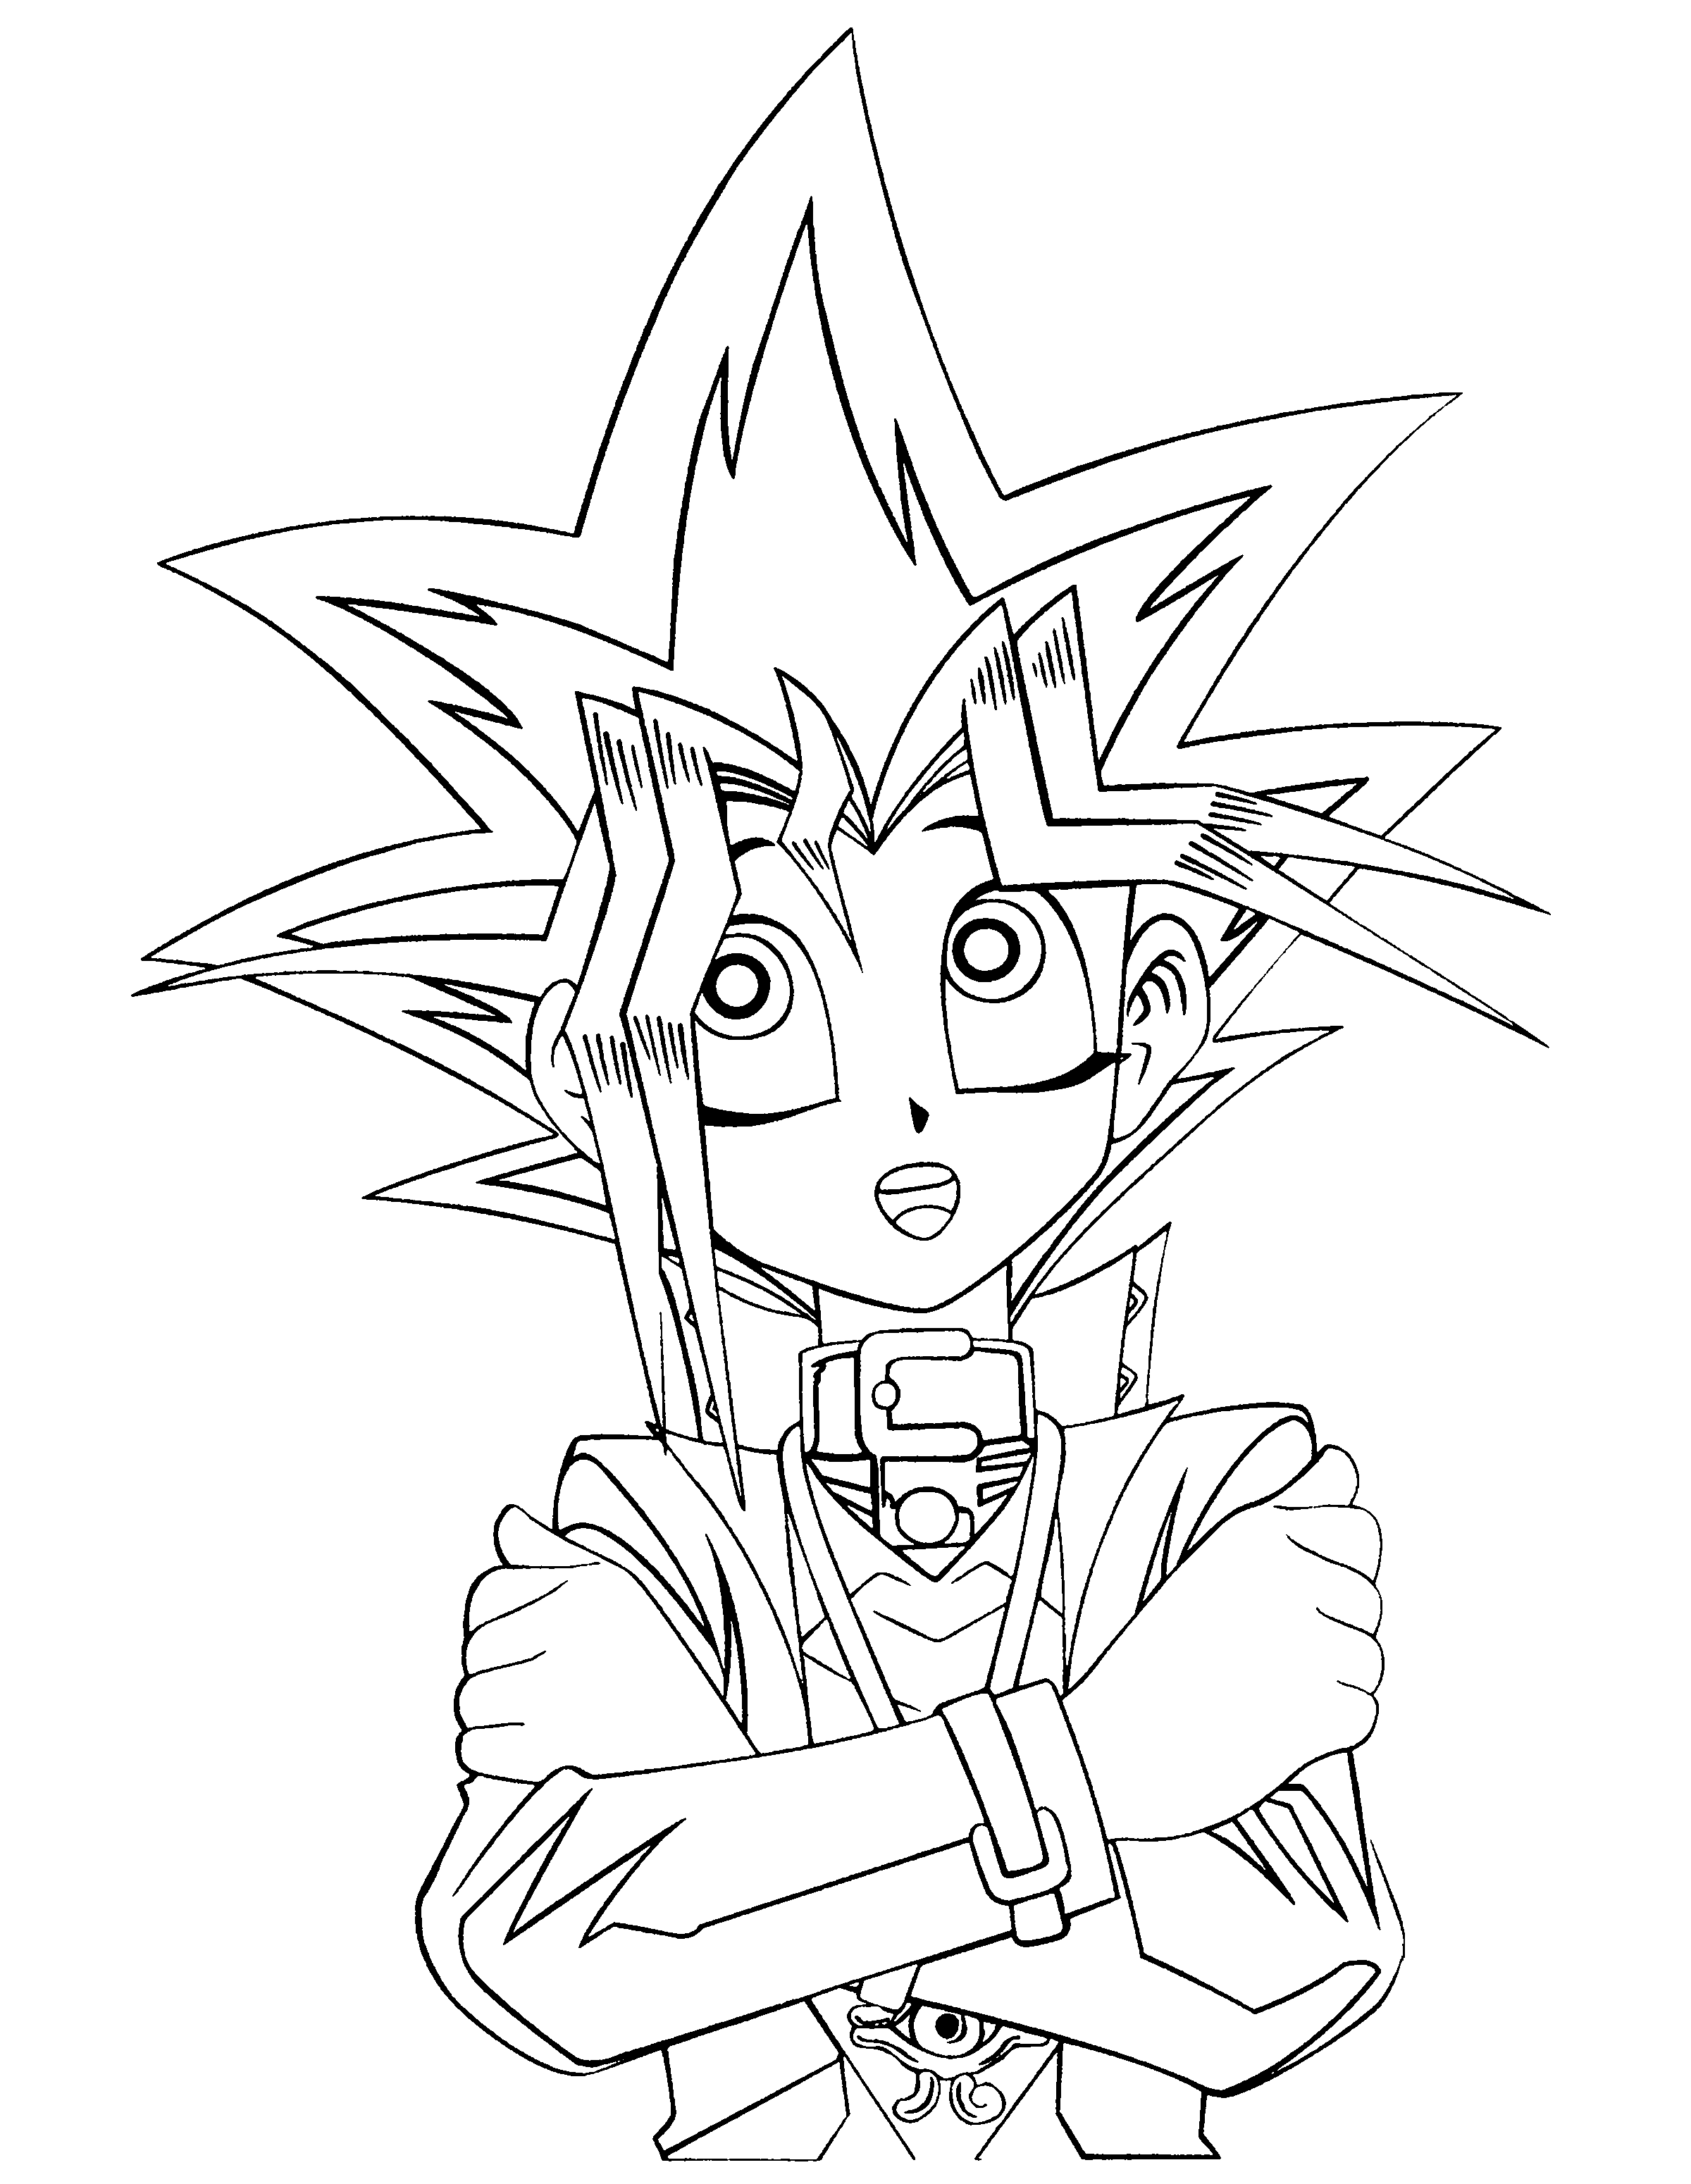 animated-coloring-pages-yu-gi-oh-image-0101